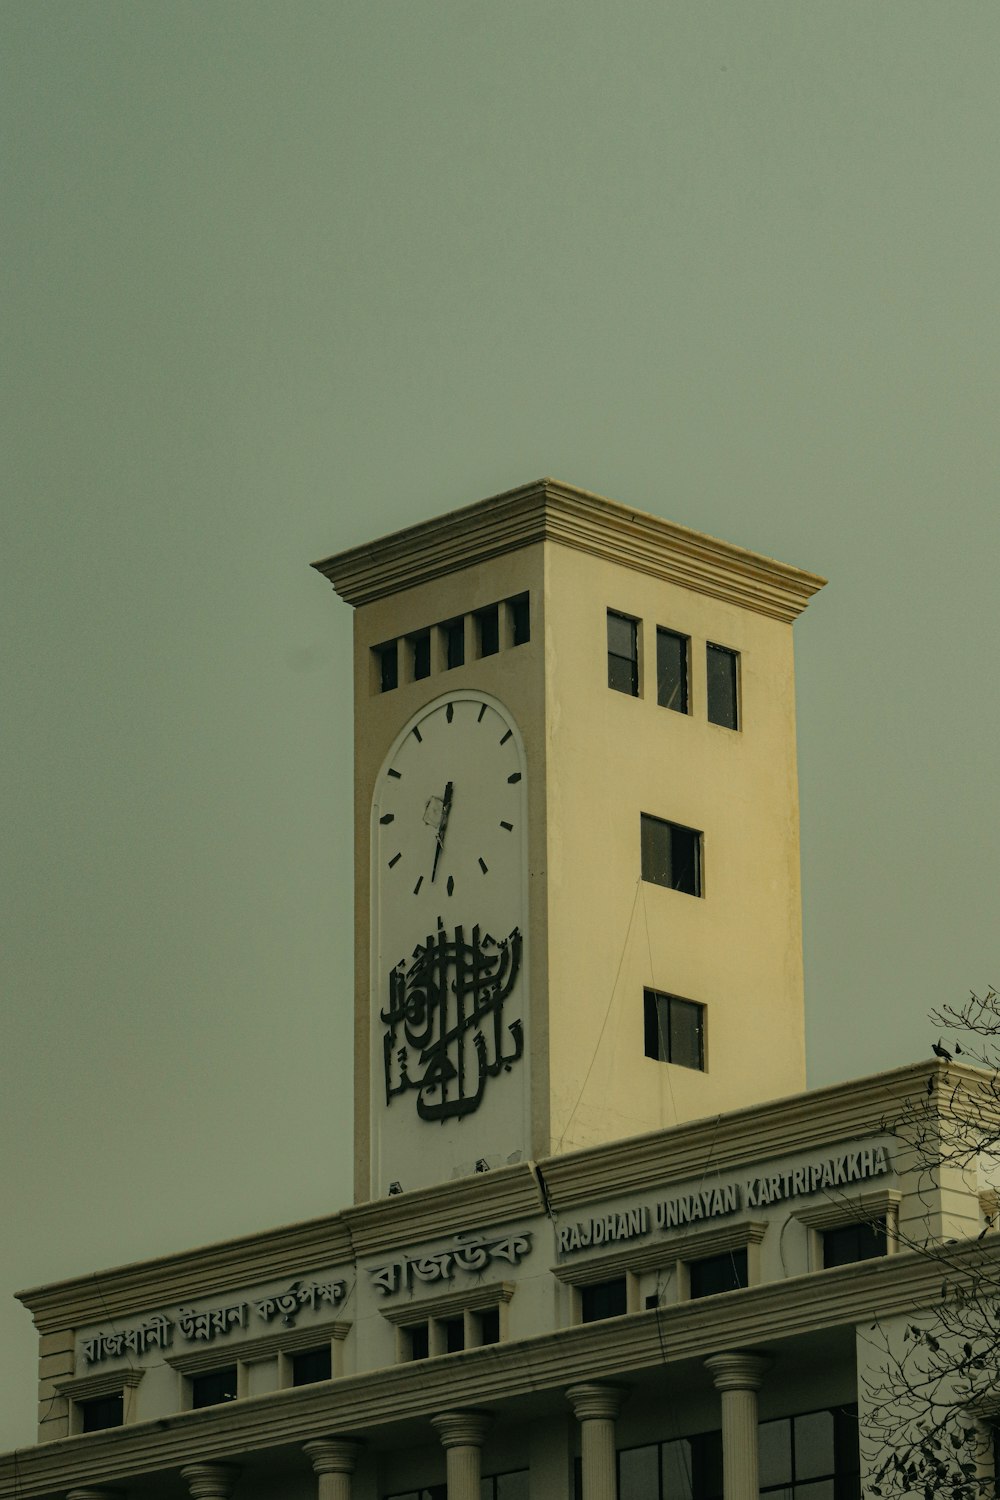 a large clock tower on top of a building